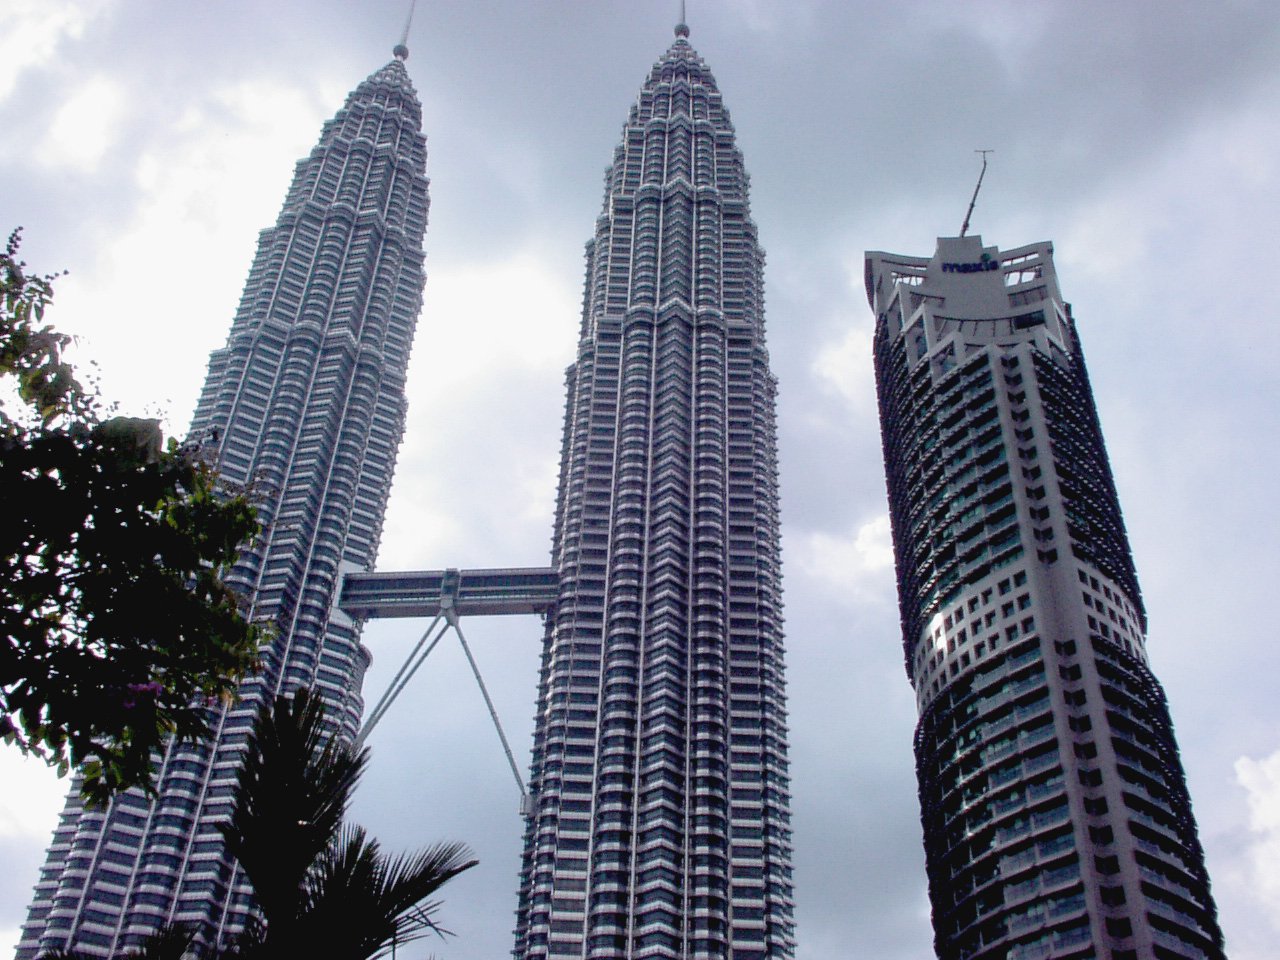 two tall towers are set against a cloudy sky